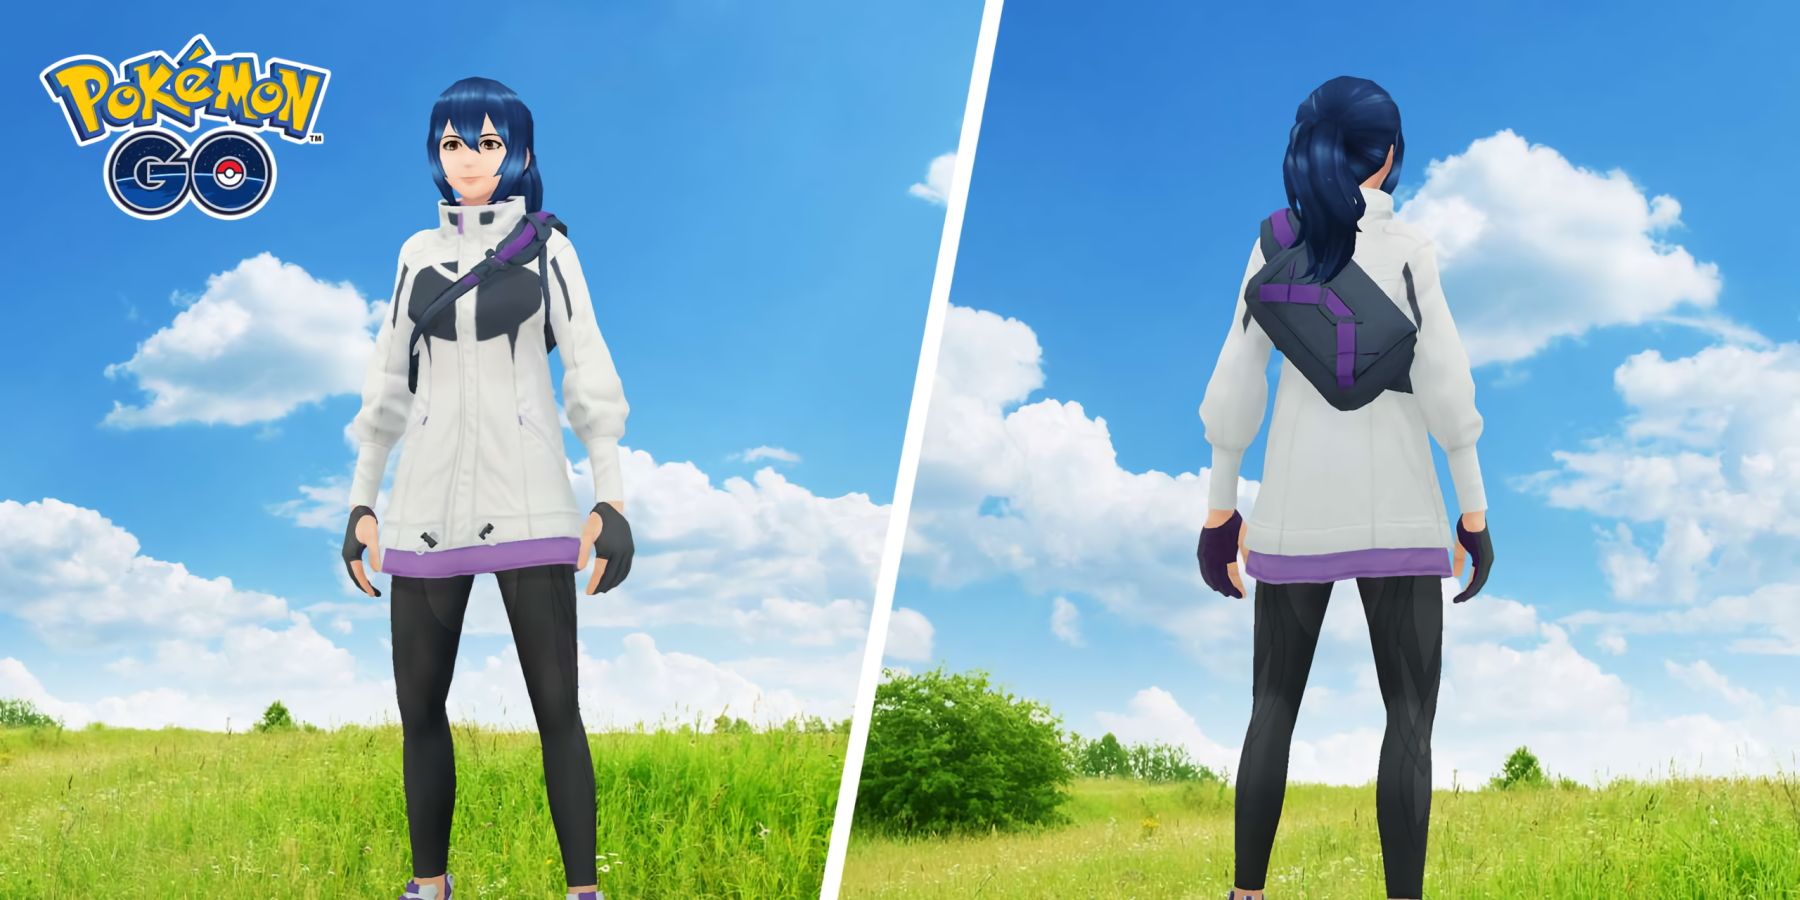 A promotional image for Pokemon GO, showing a new avatar following the controversial avatar update.